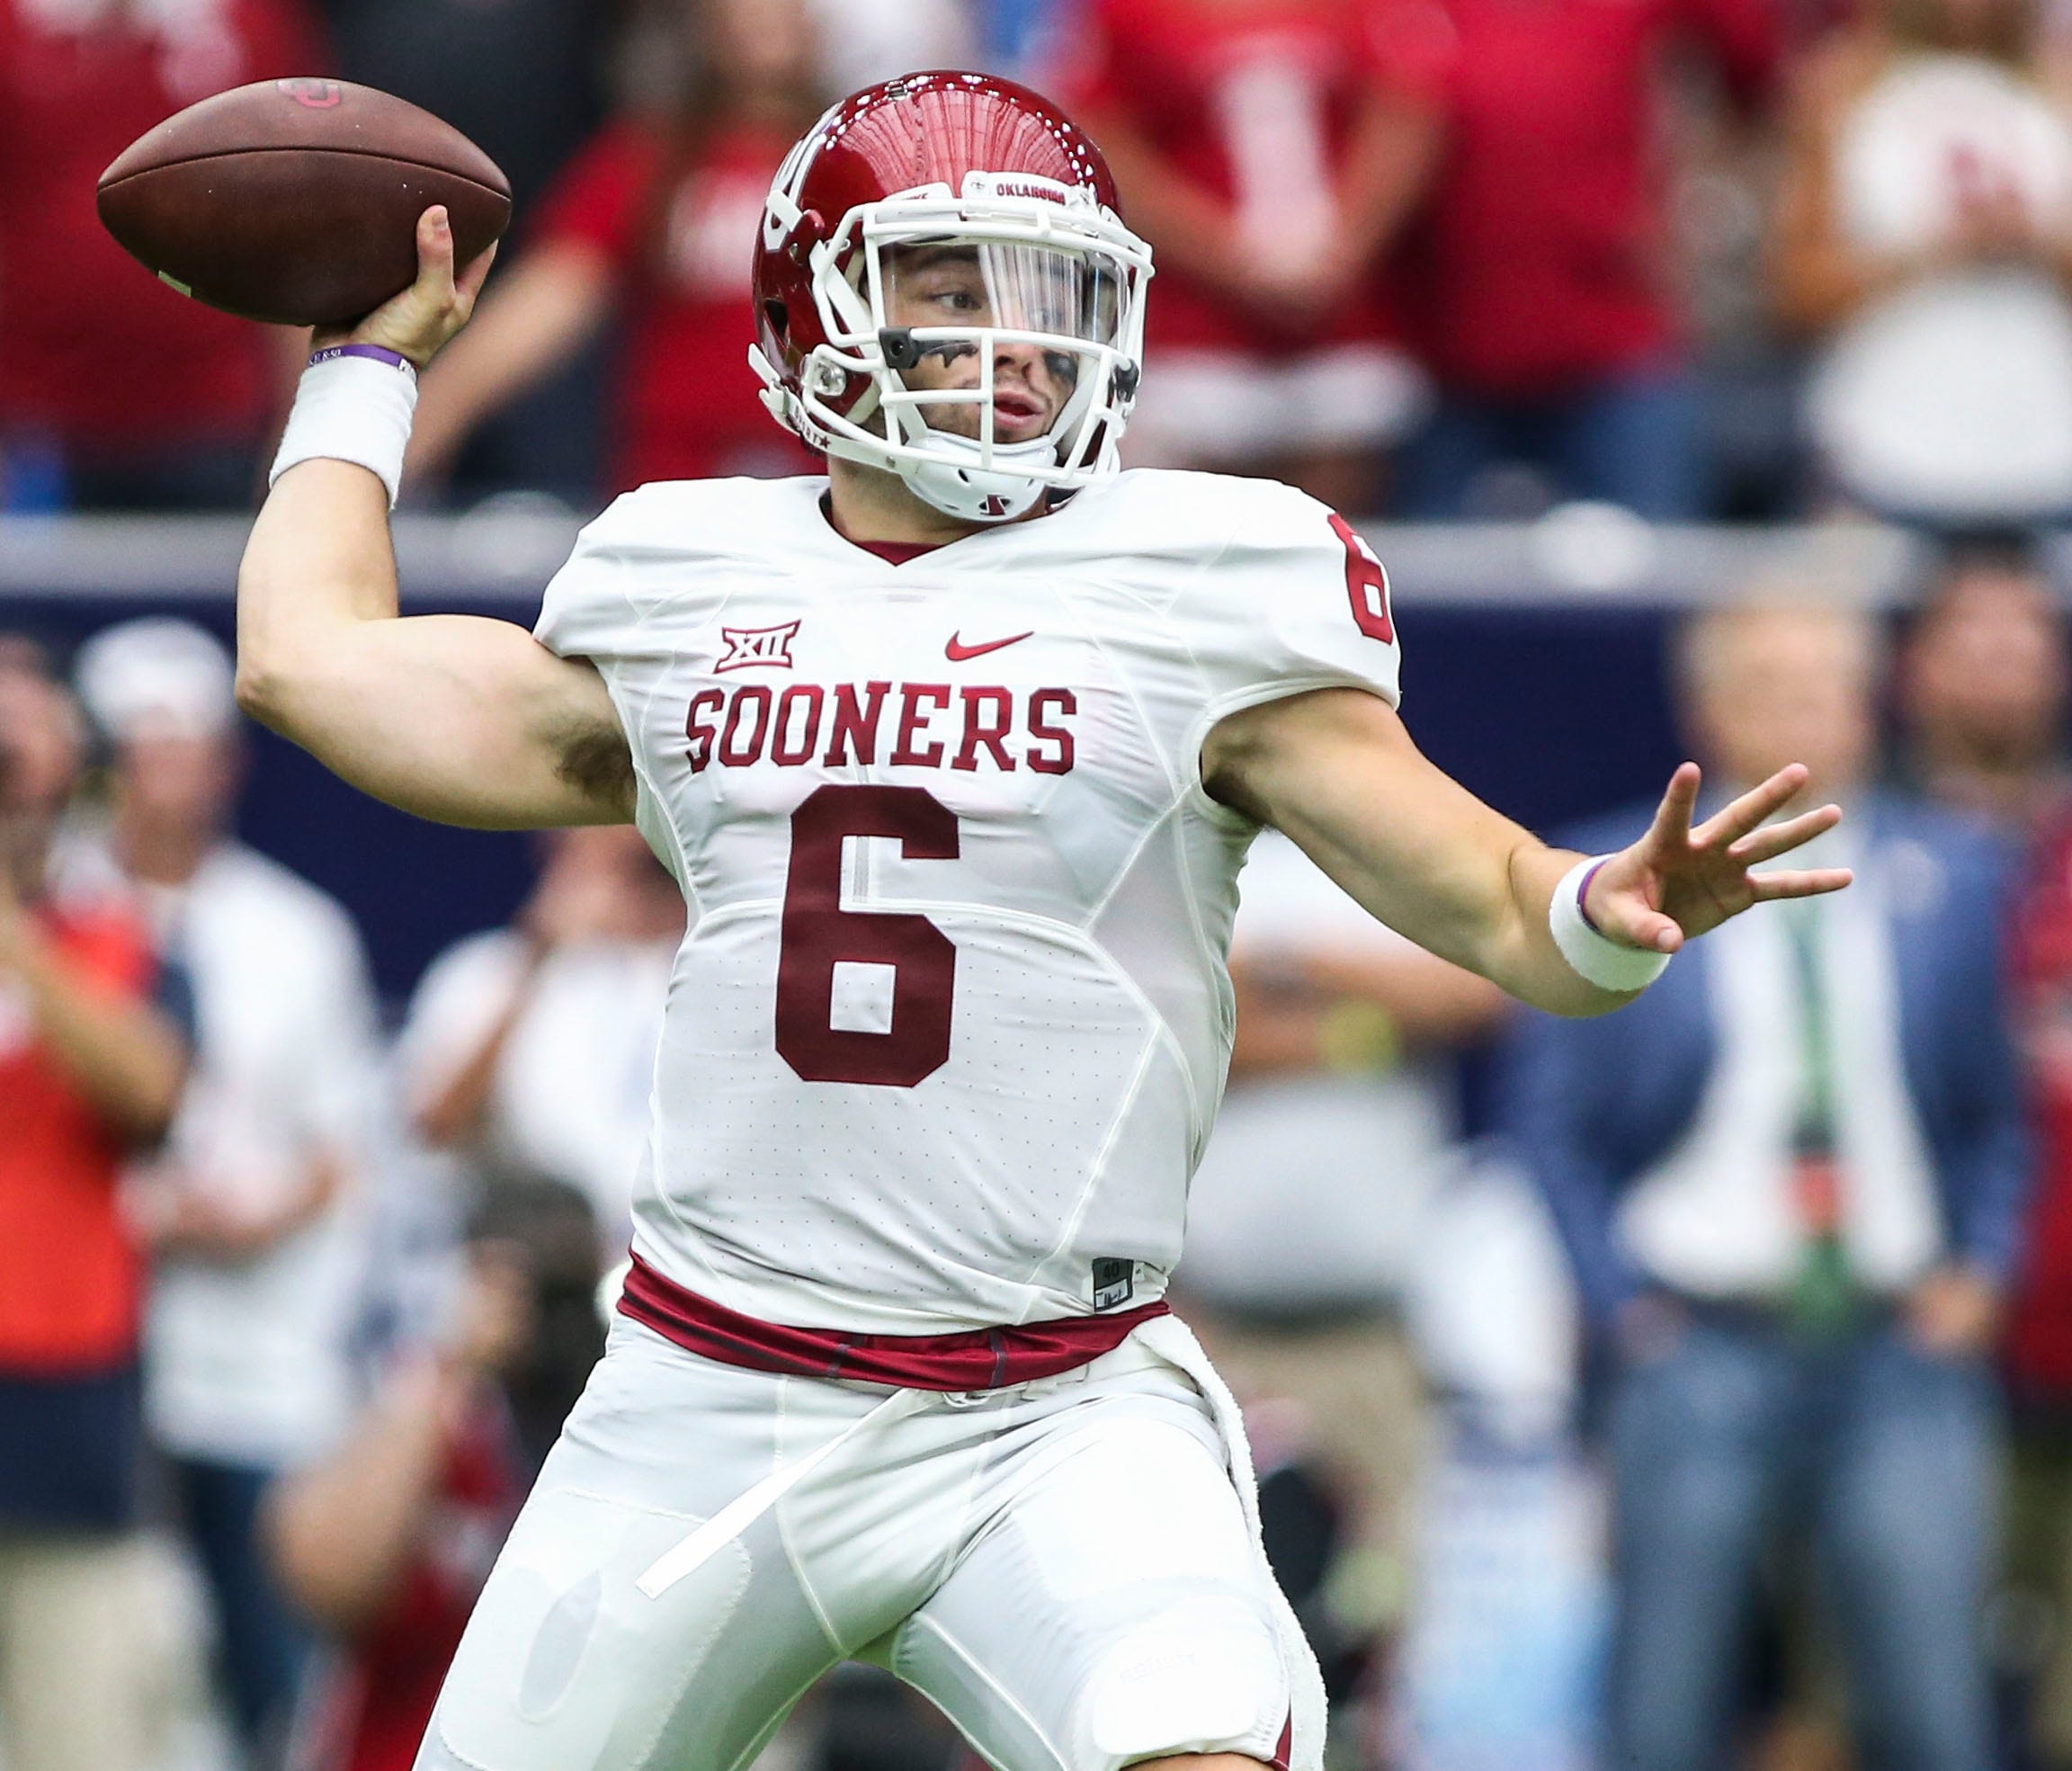 Oklahoma quarterback Baker Mayfield attempts a pass against Houston at NRG Stadium.